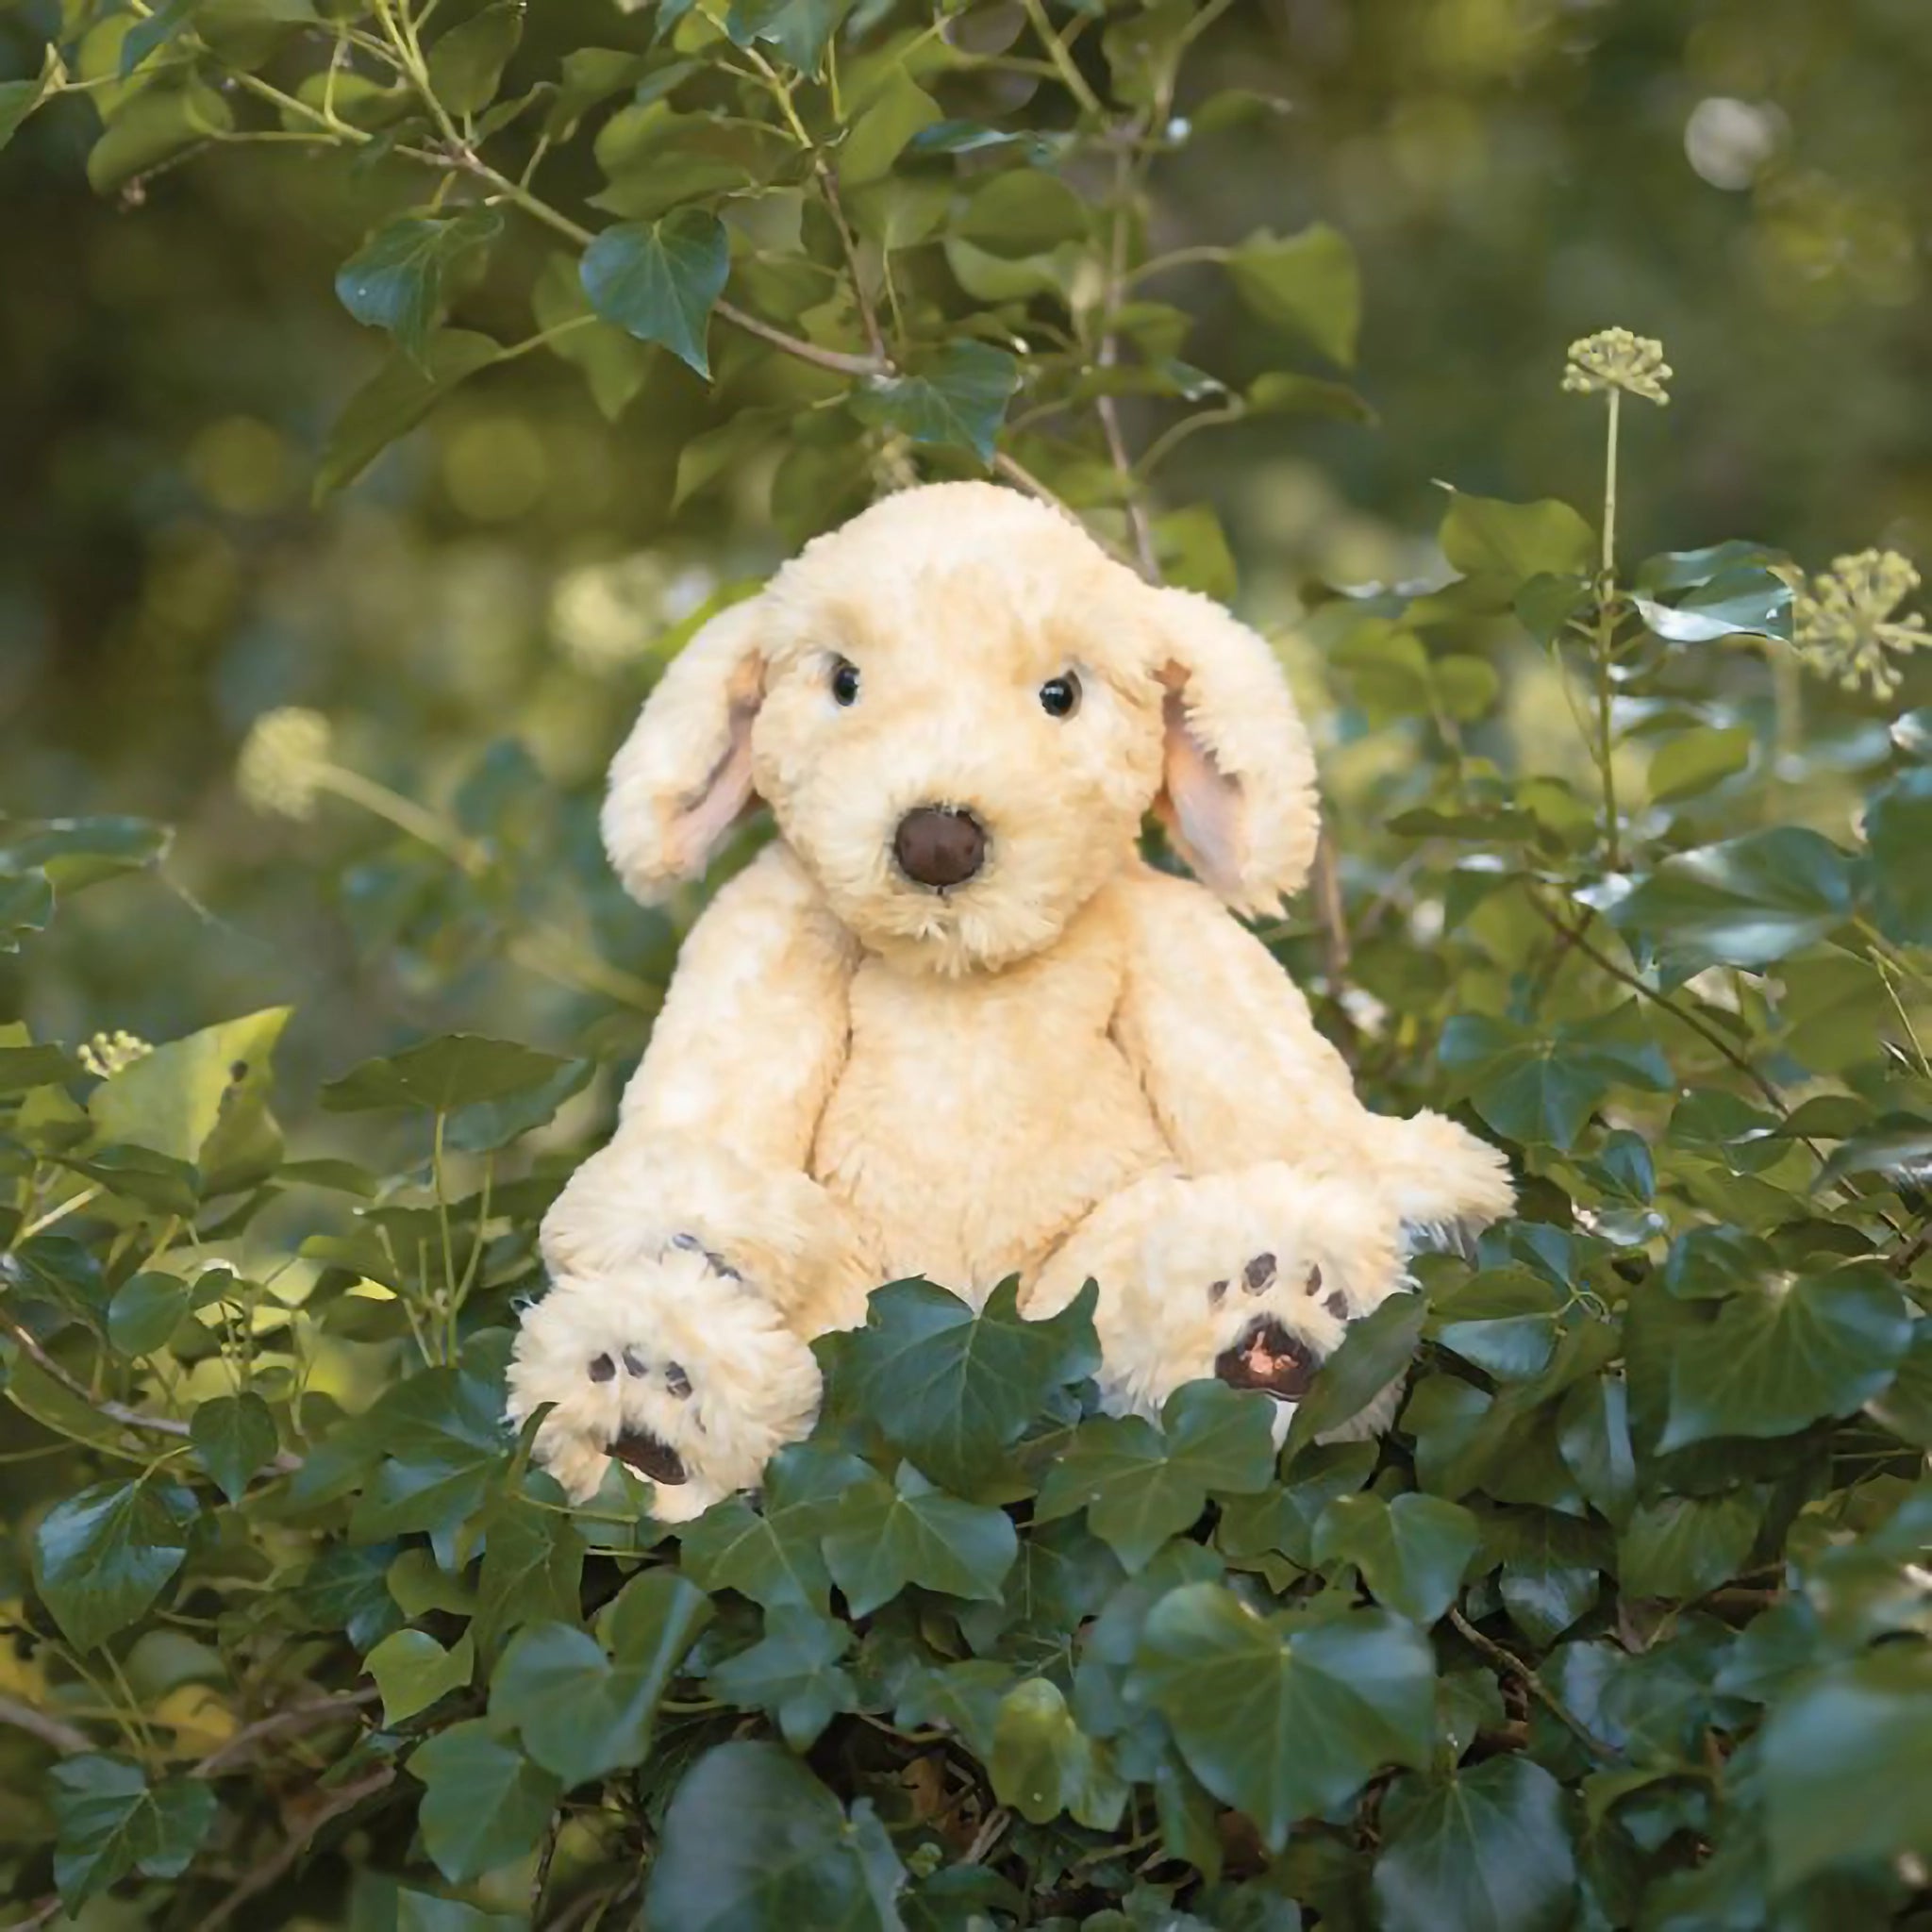 A stuffed labrador puppy plush toy with the Wrendale logo embroidered on the bottom of its foot posed in ivy